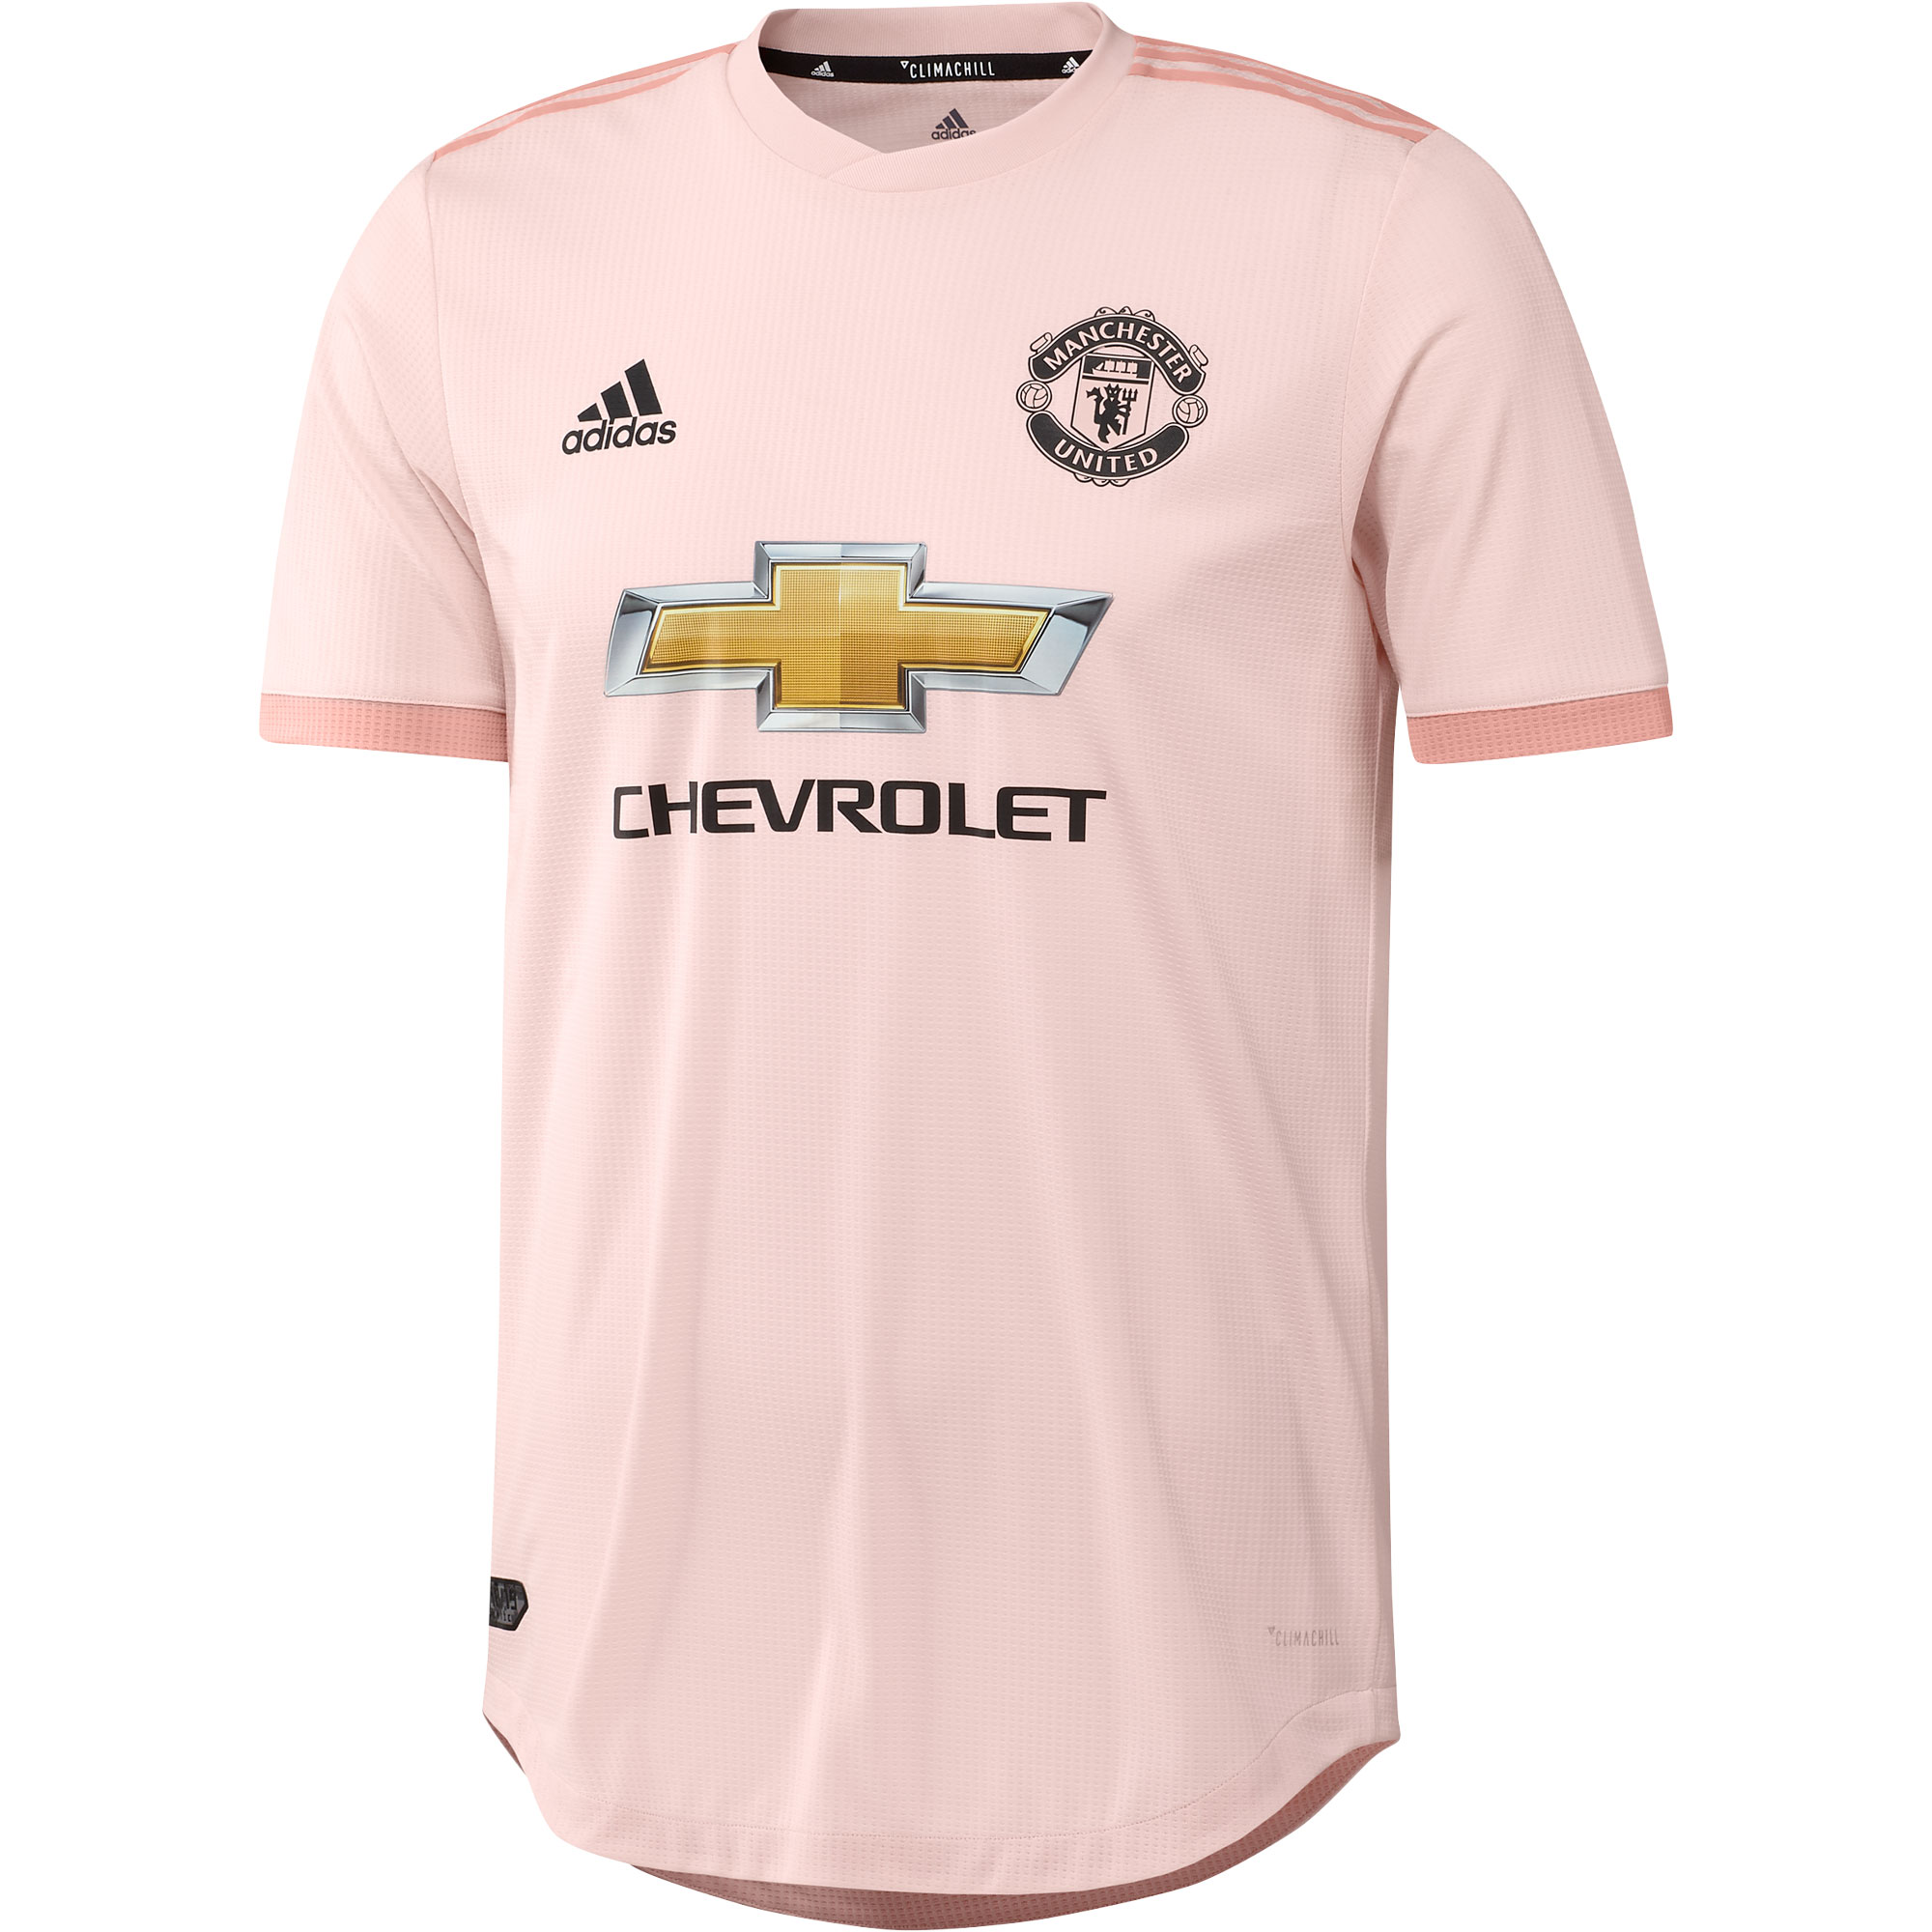 Manchester United Away football shirt 2016 - 2017. Sponsored by Chevrolet